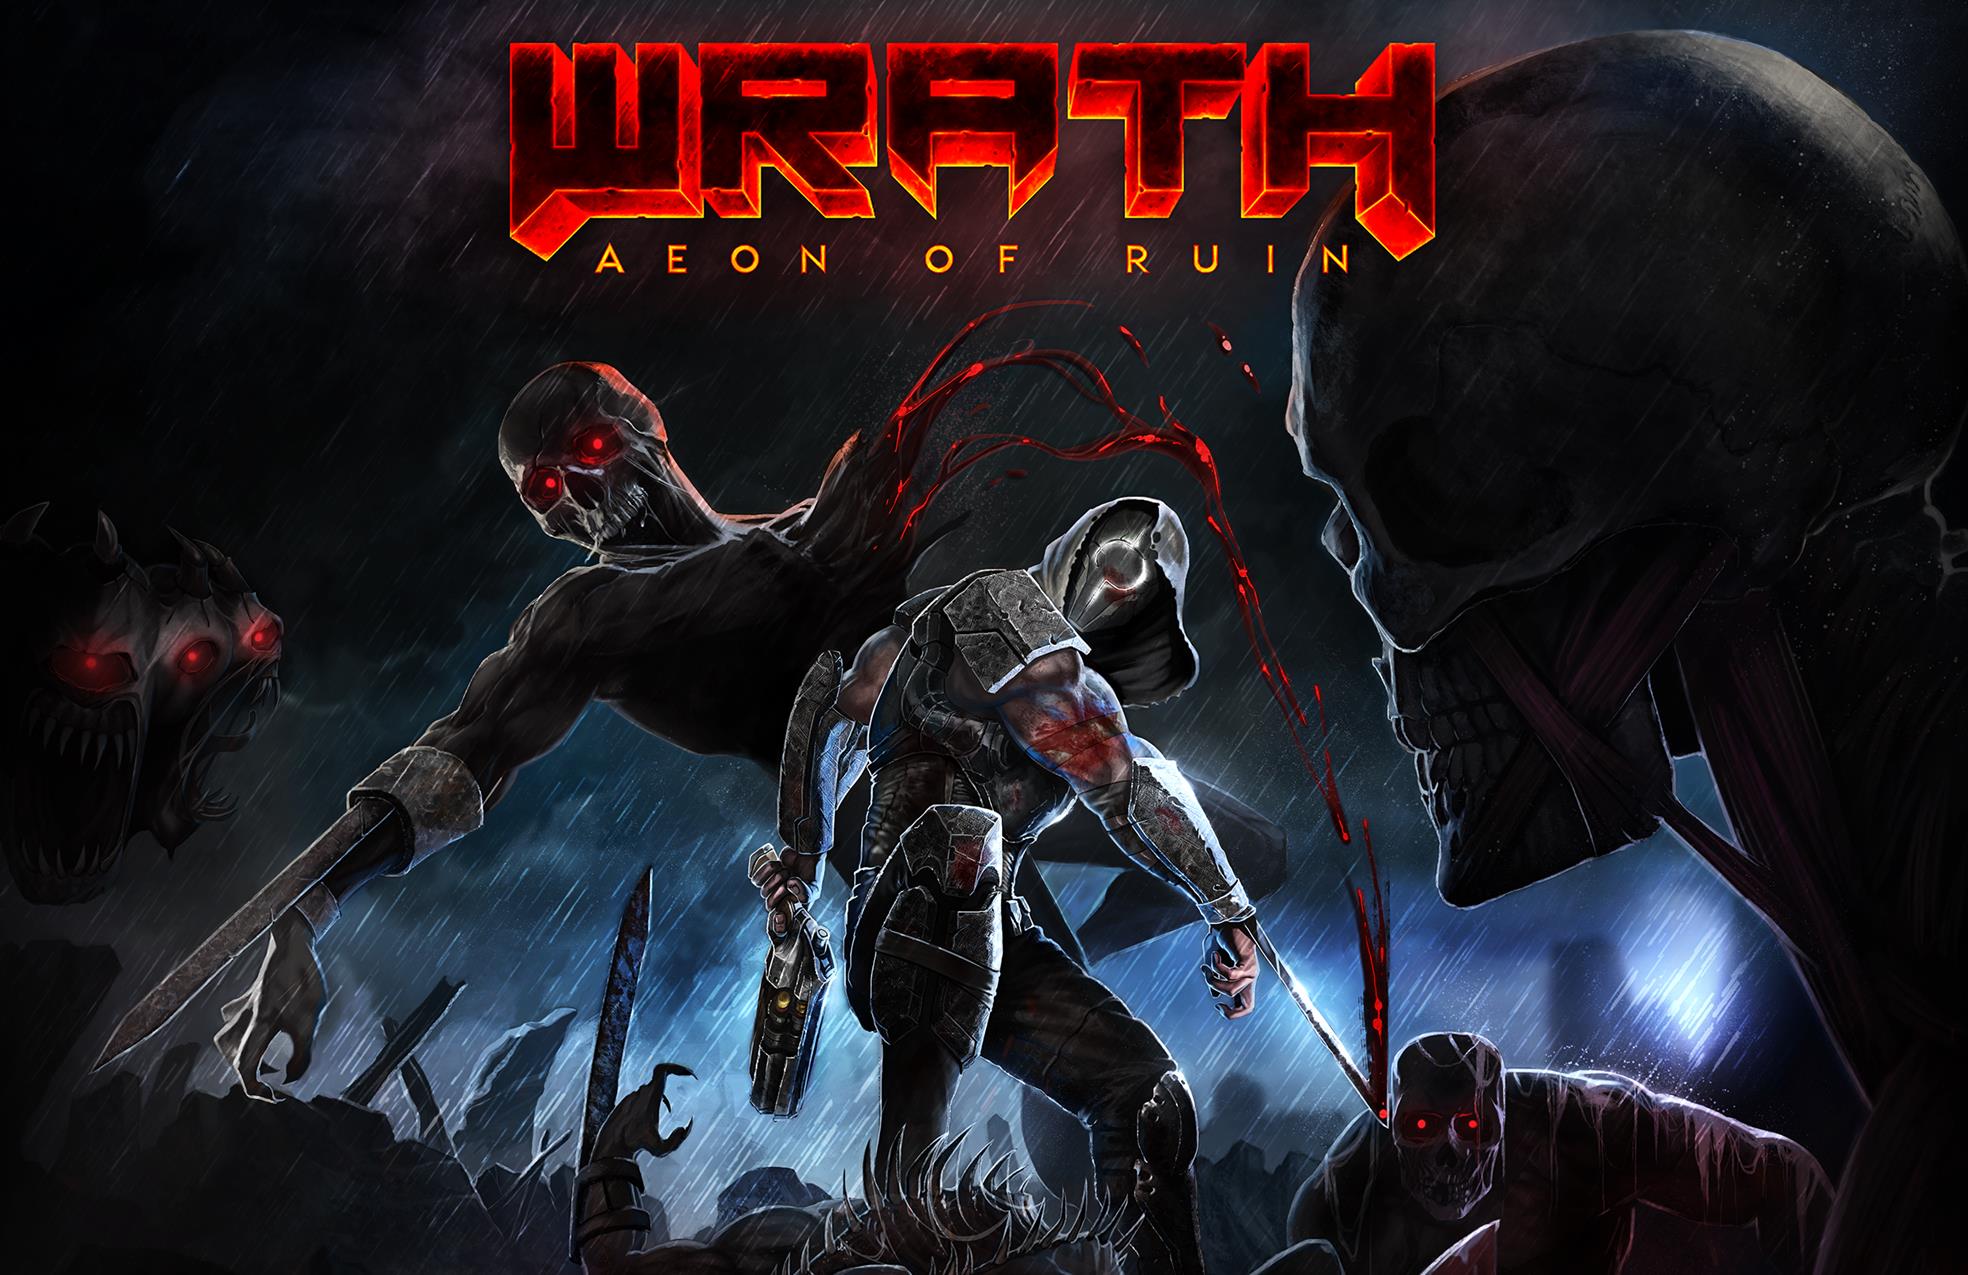 Image for Wrath: Aeon of Ruin is an old-school shooter from Quake scene vets